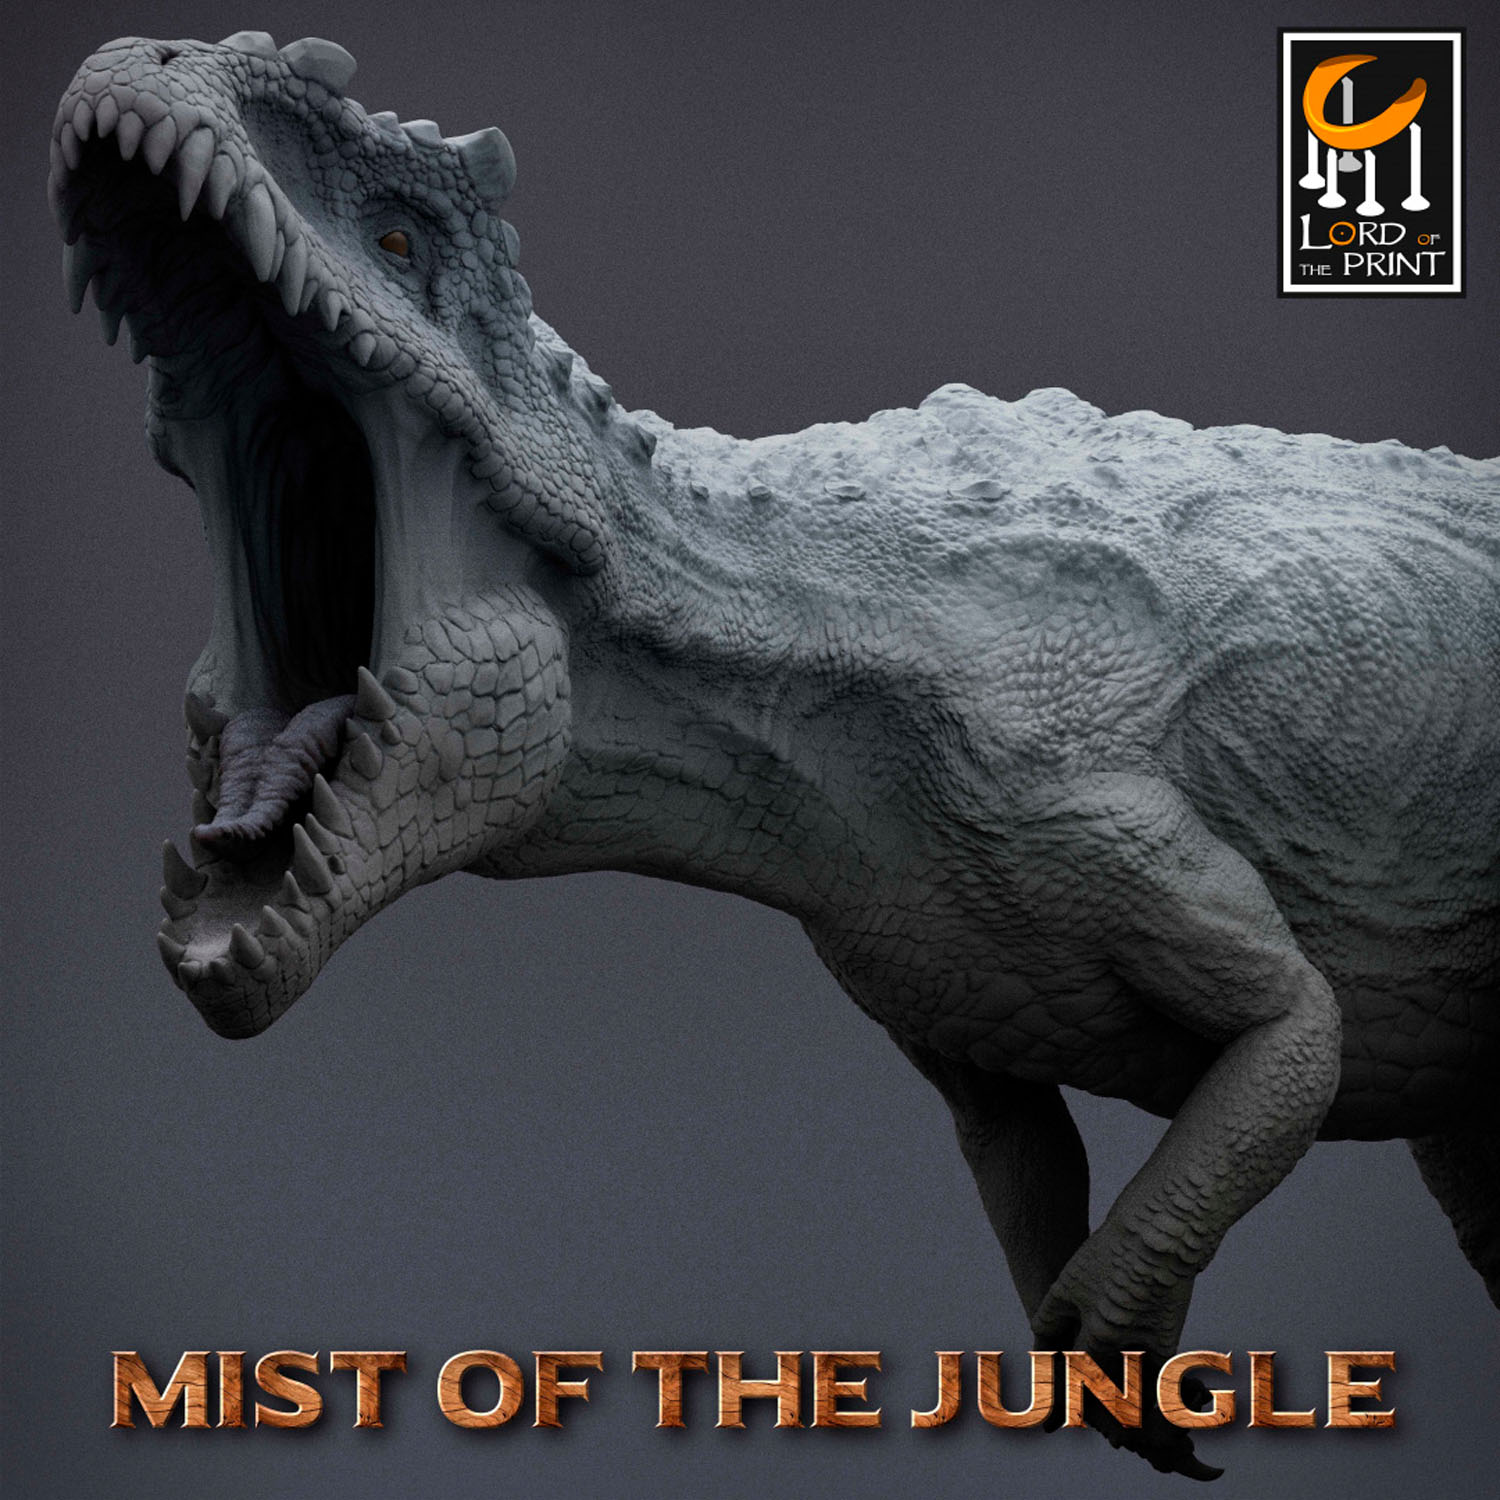 Gigantosaurus - miniature for table war-games & collecting